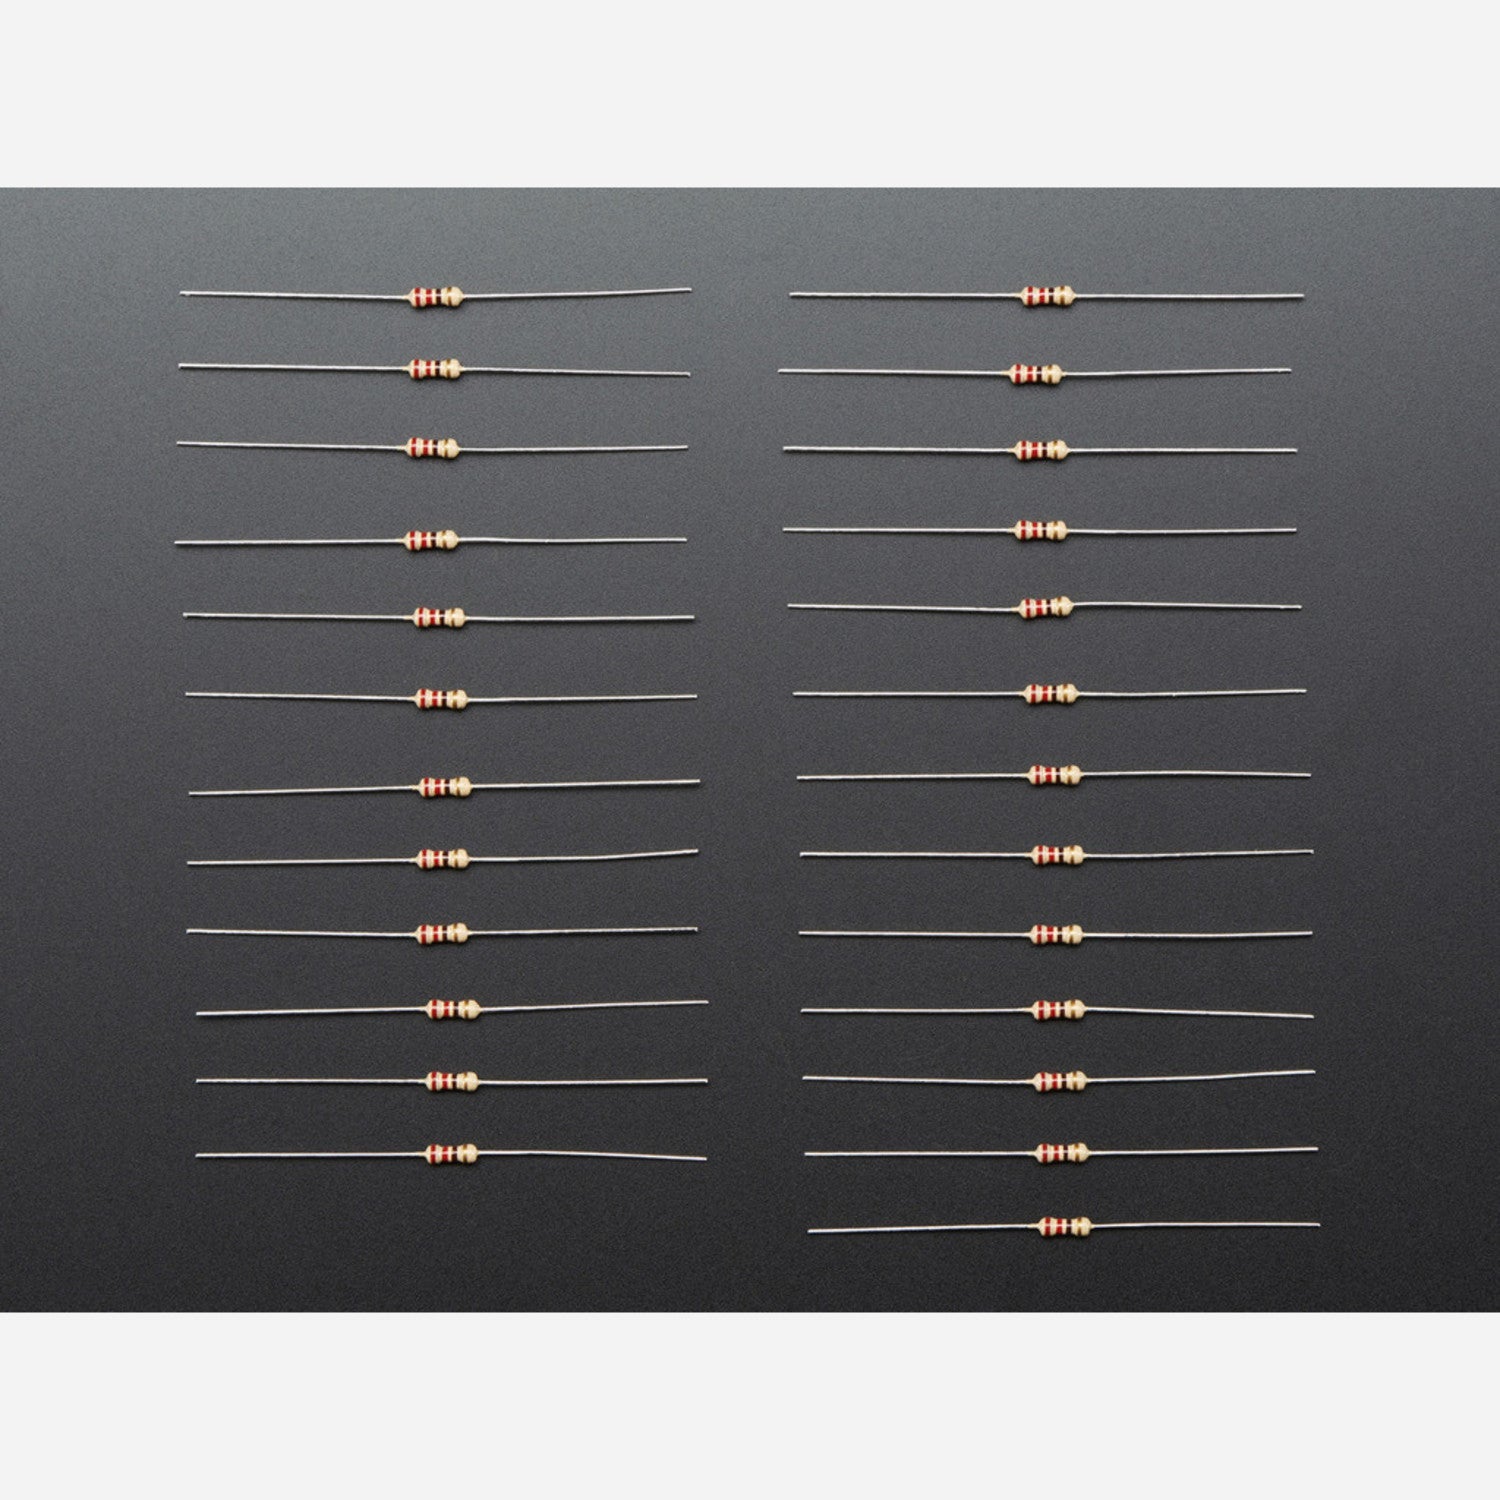 Through-Hole Resistors - 220 ohm 5% 1/4W - Pack of 25